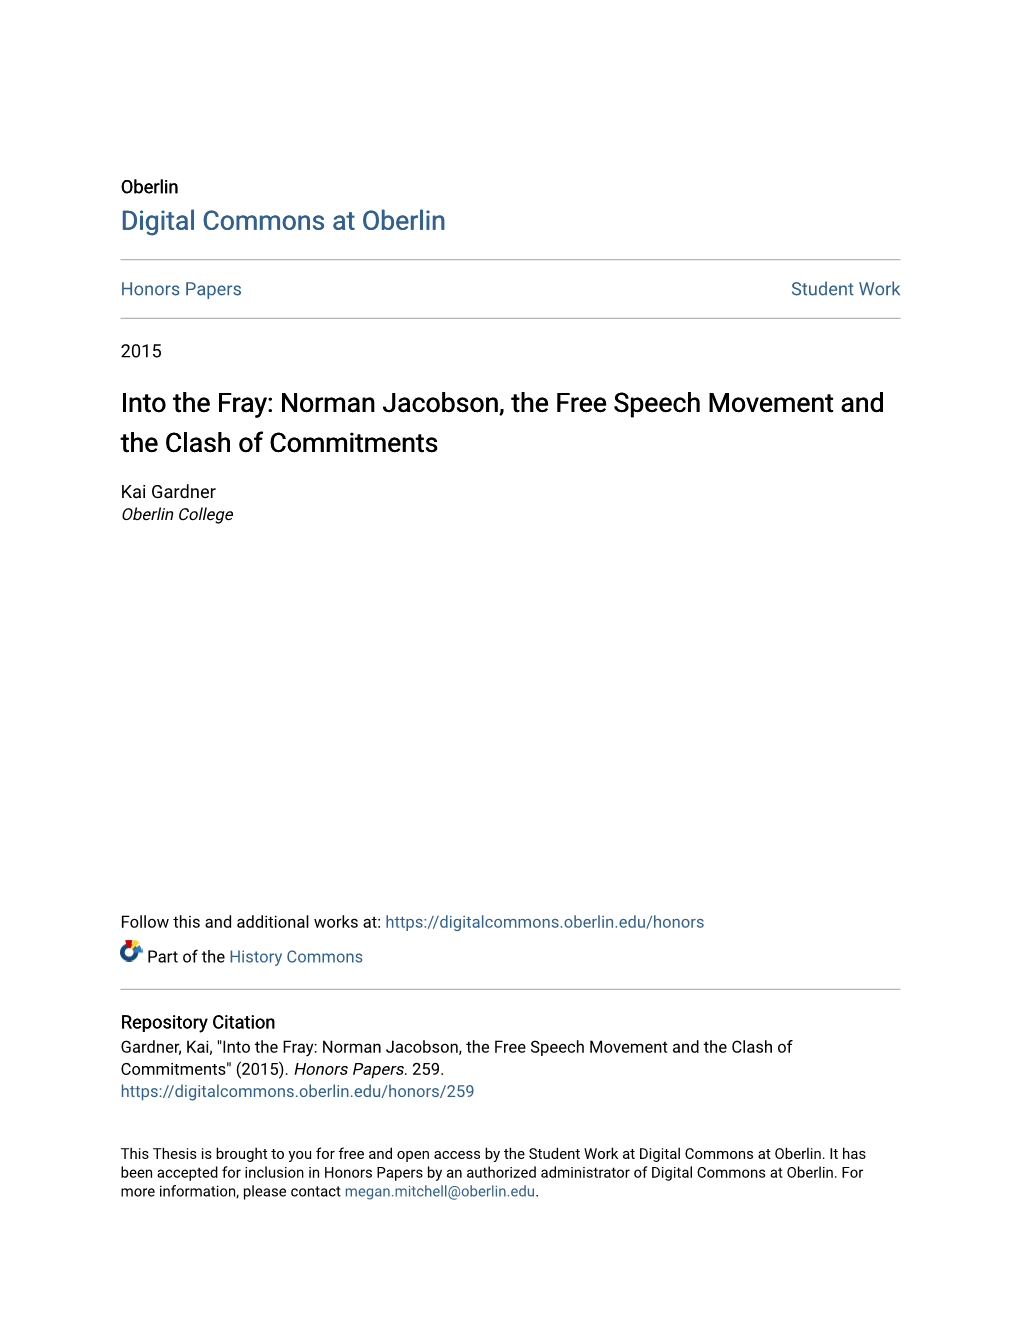 Norman Jacobson, the Free Speech Movement and the Clash of Commitments